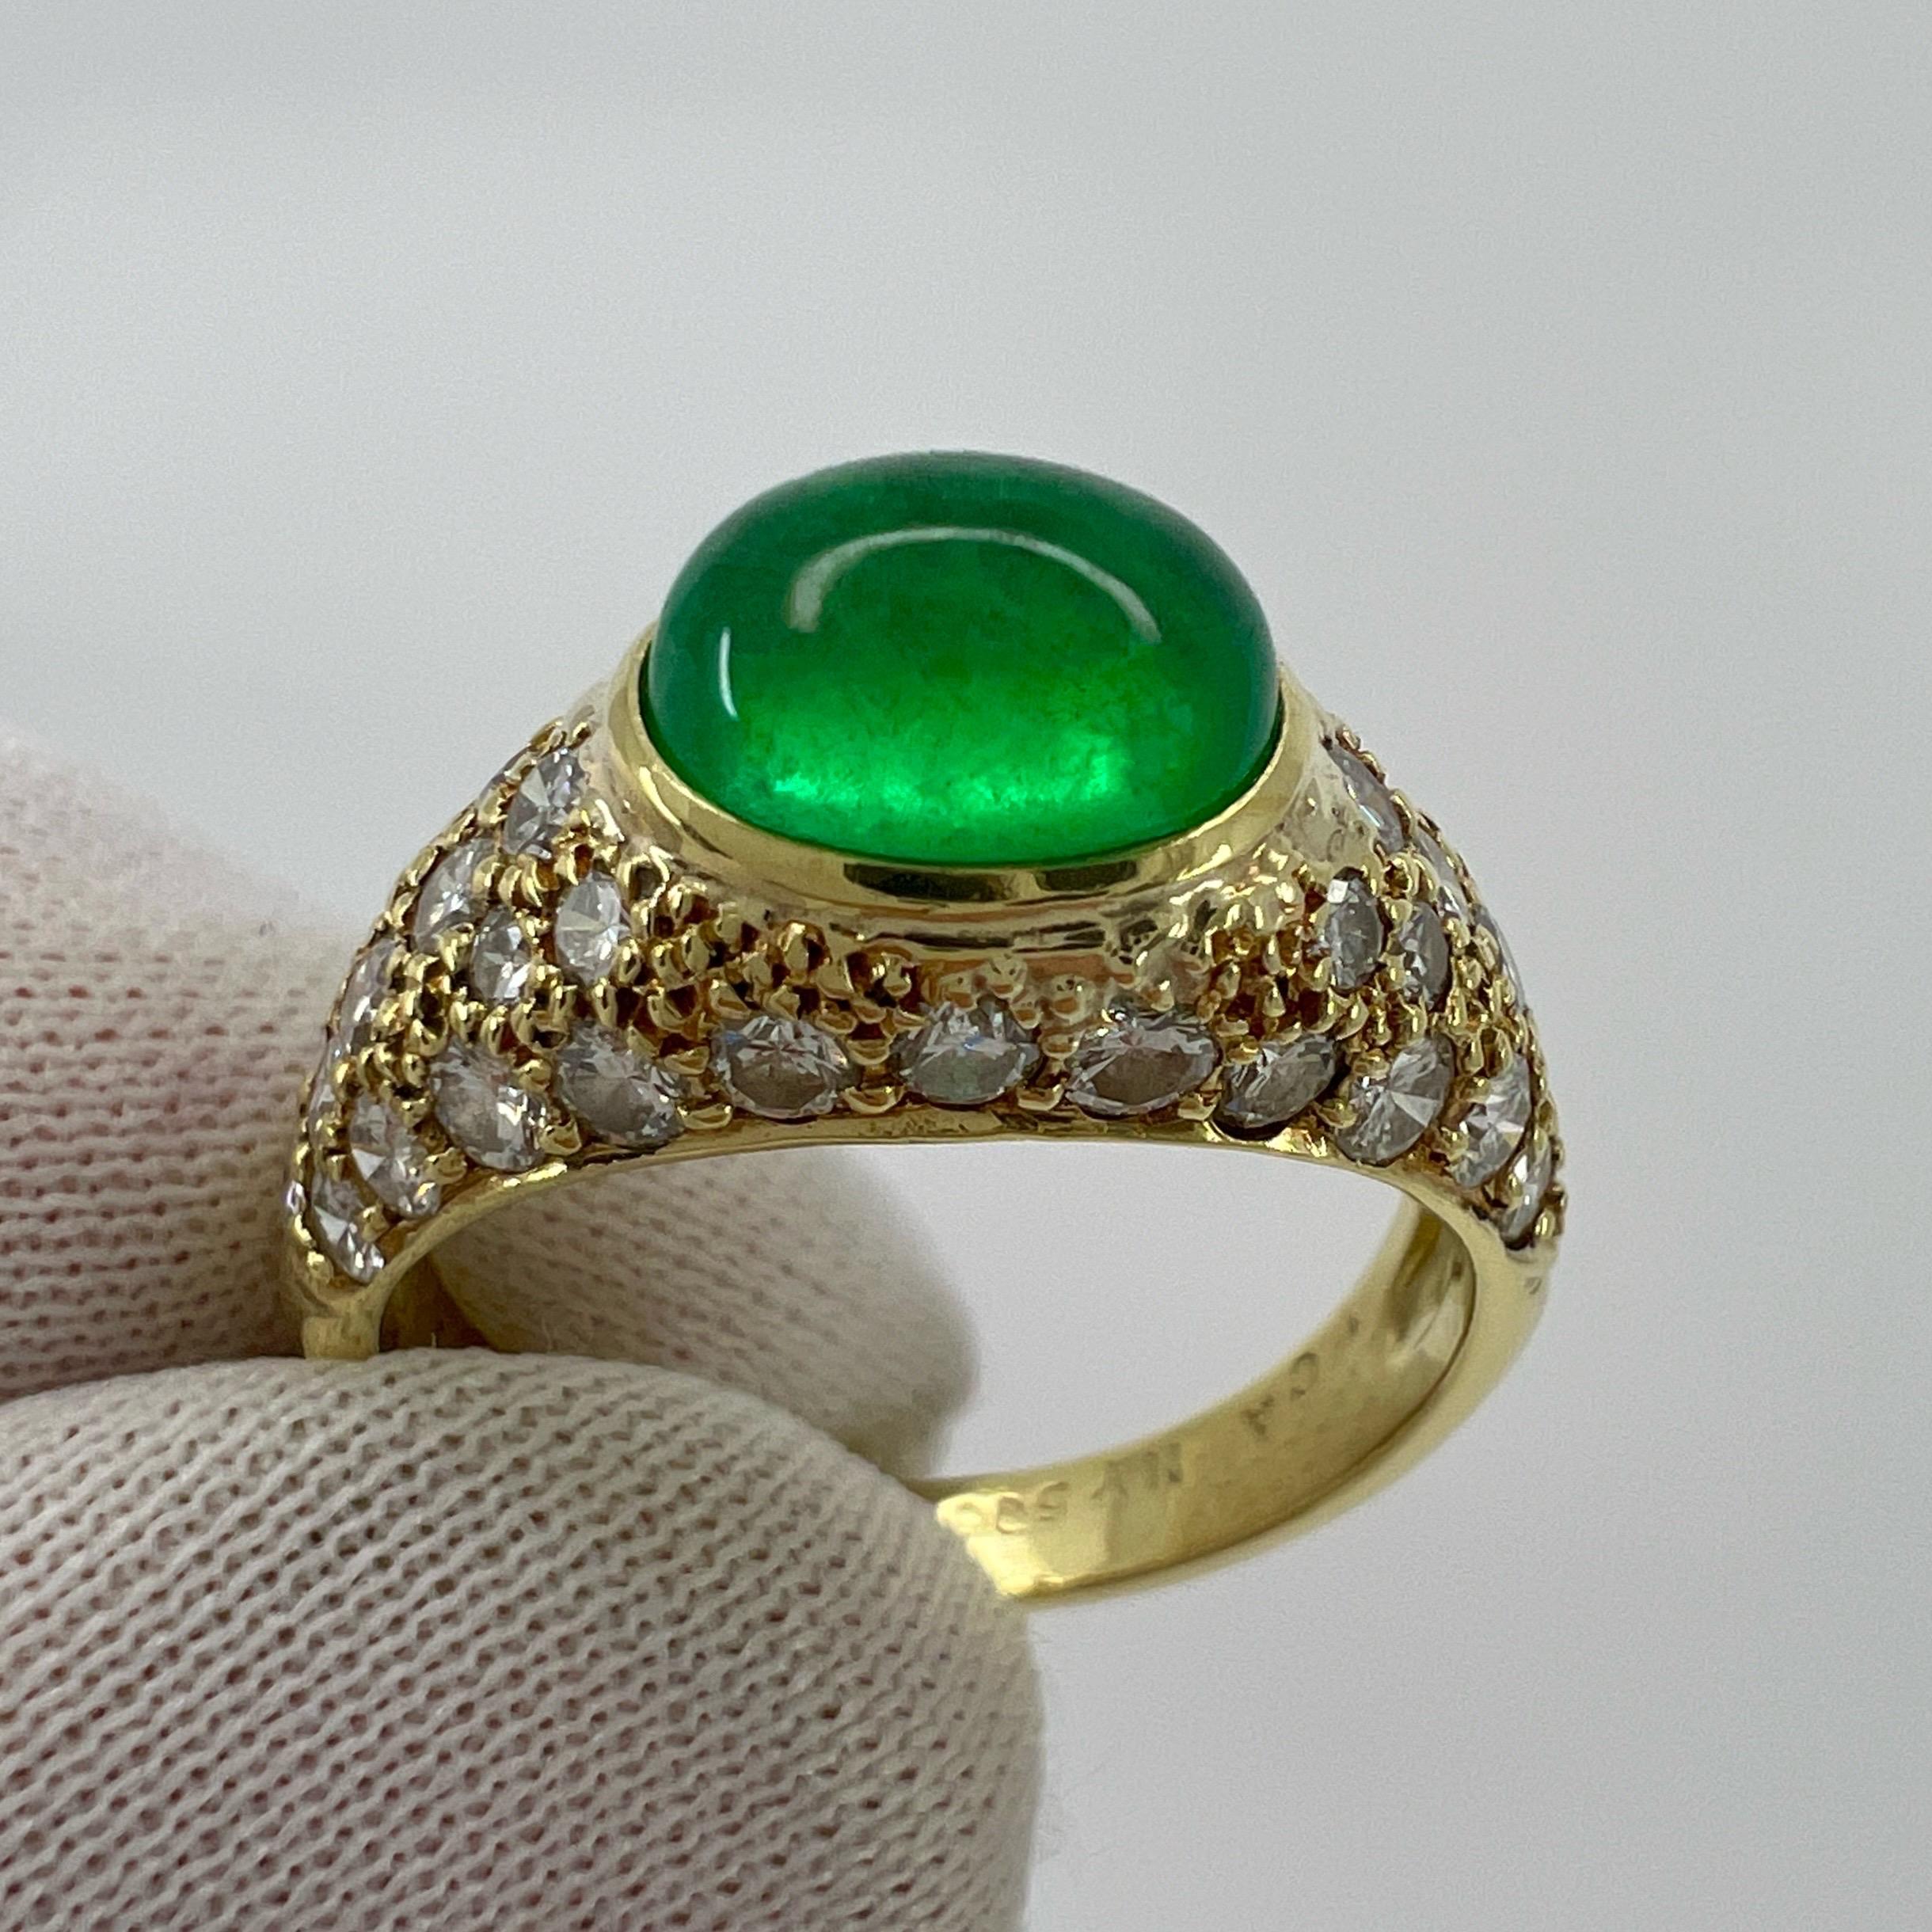 Oval Cut Rare Vintage Van Cleef & Arpels 2 Carat Emerald And Diamond Cocktail Dome Ring For Sale